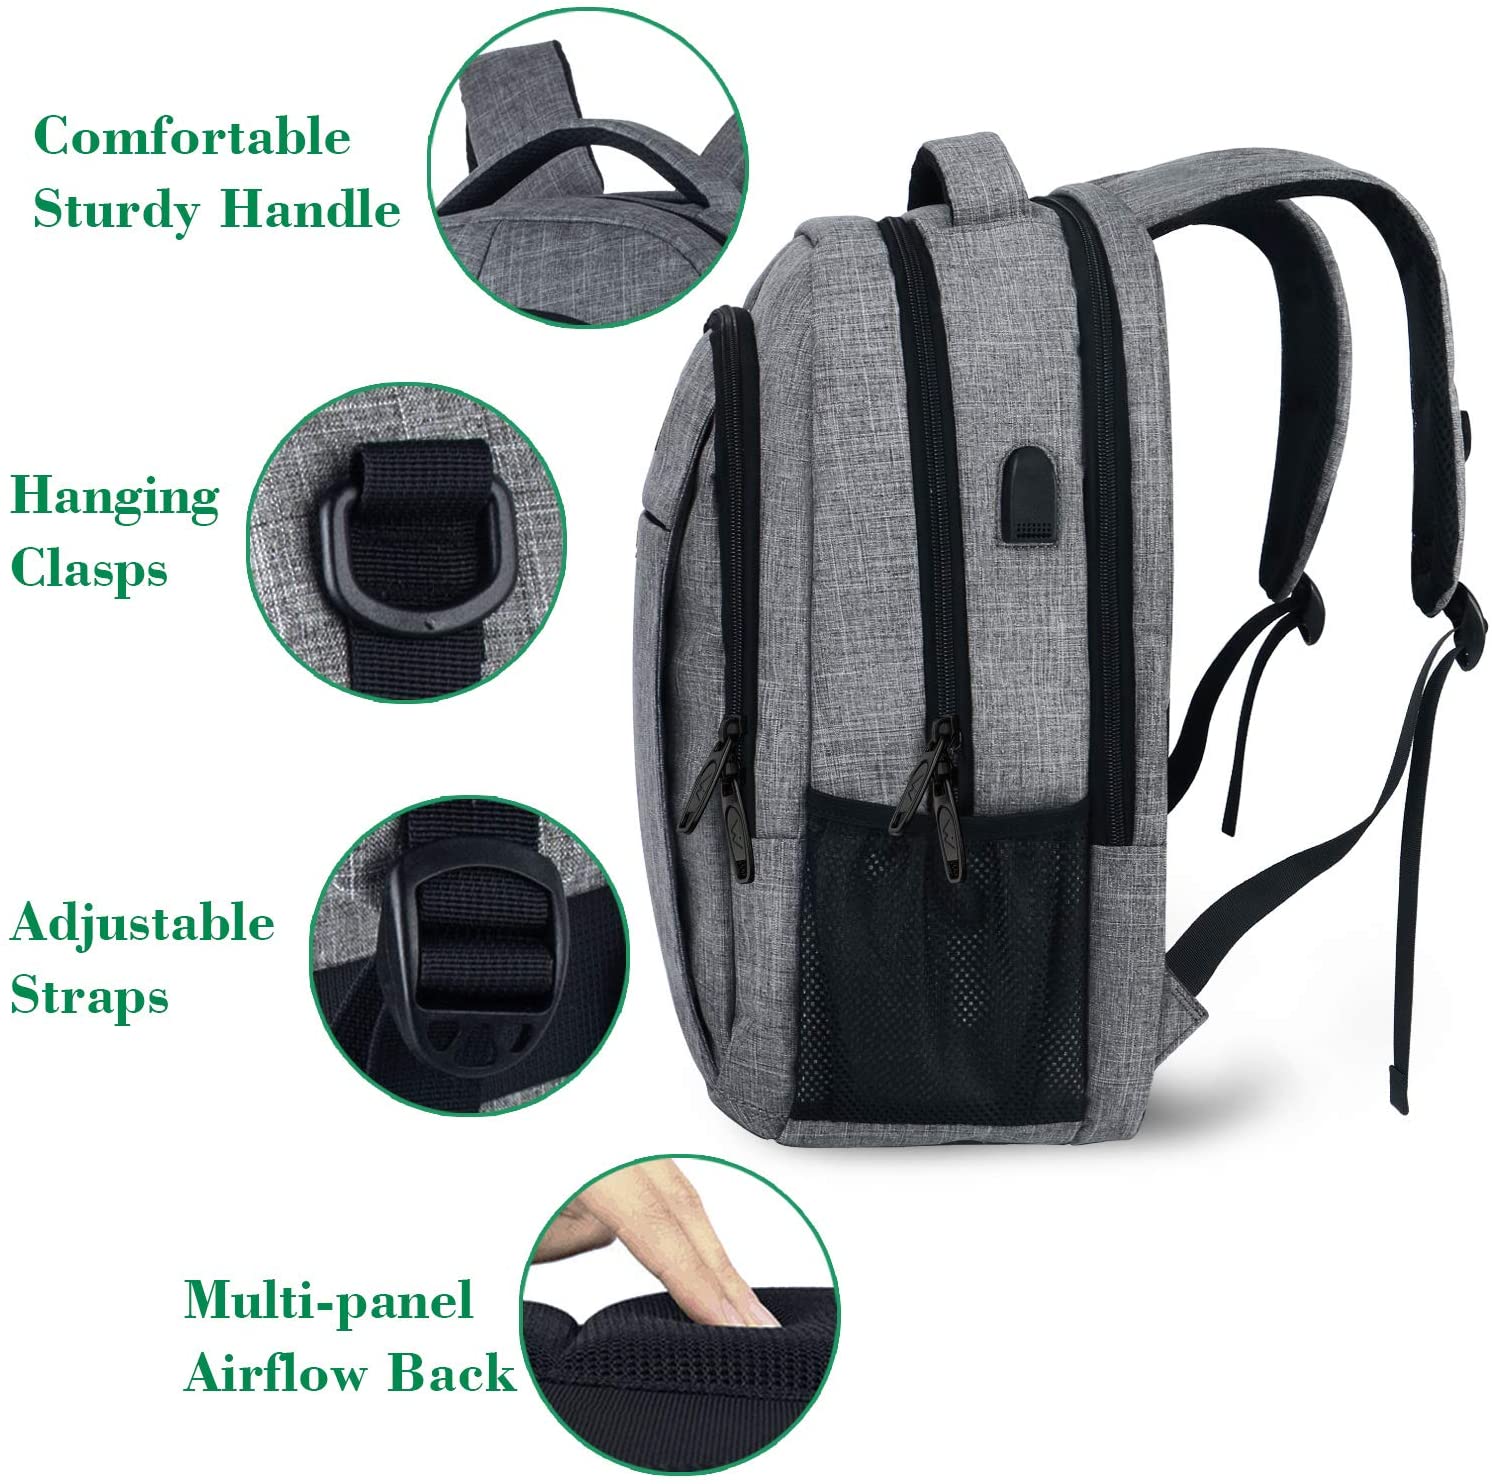 Matein 15.6 Inch Travel Laptop Backpack, Business Computer Bag Laptop Bag Gifts for Men & Women - image 4 of 7